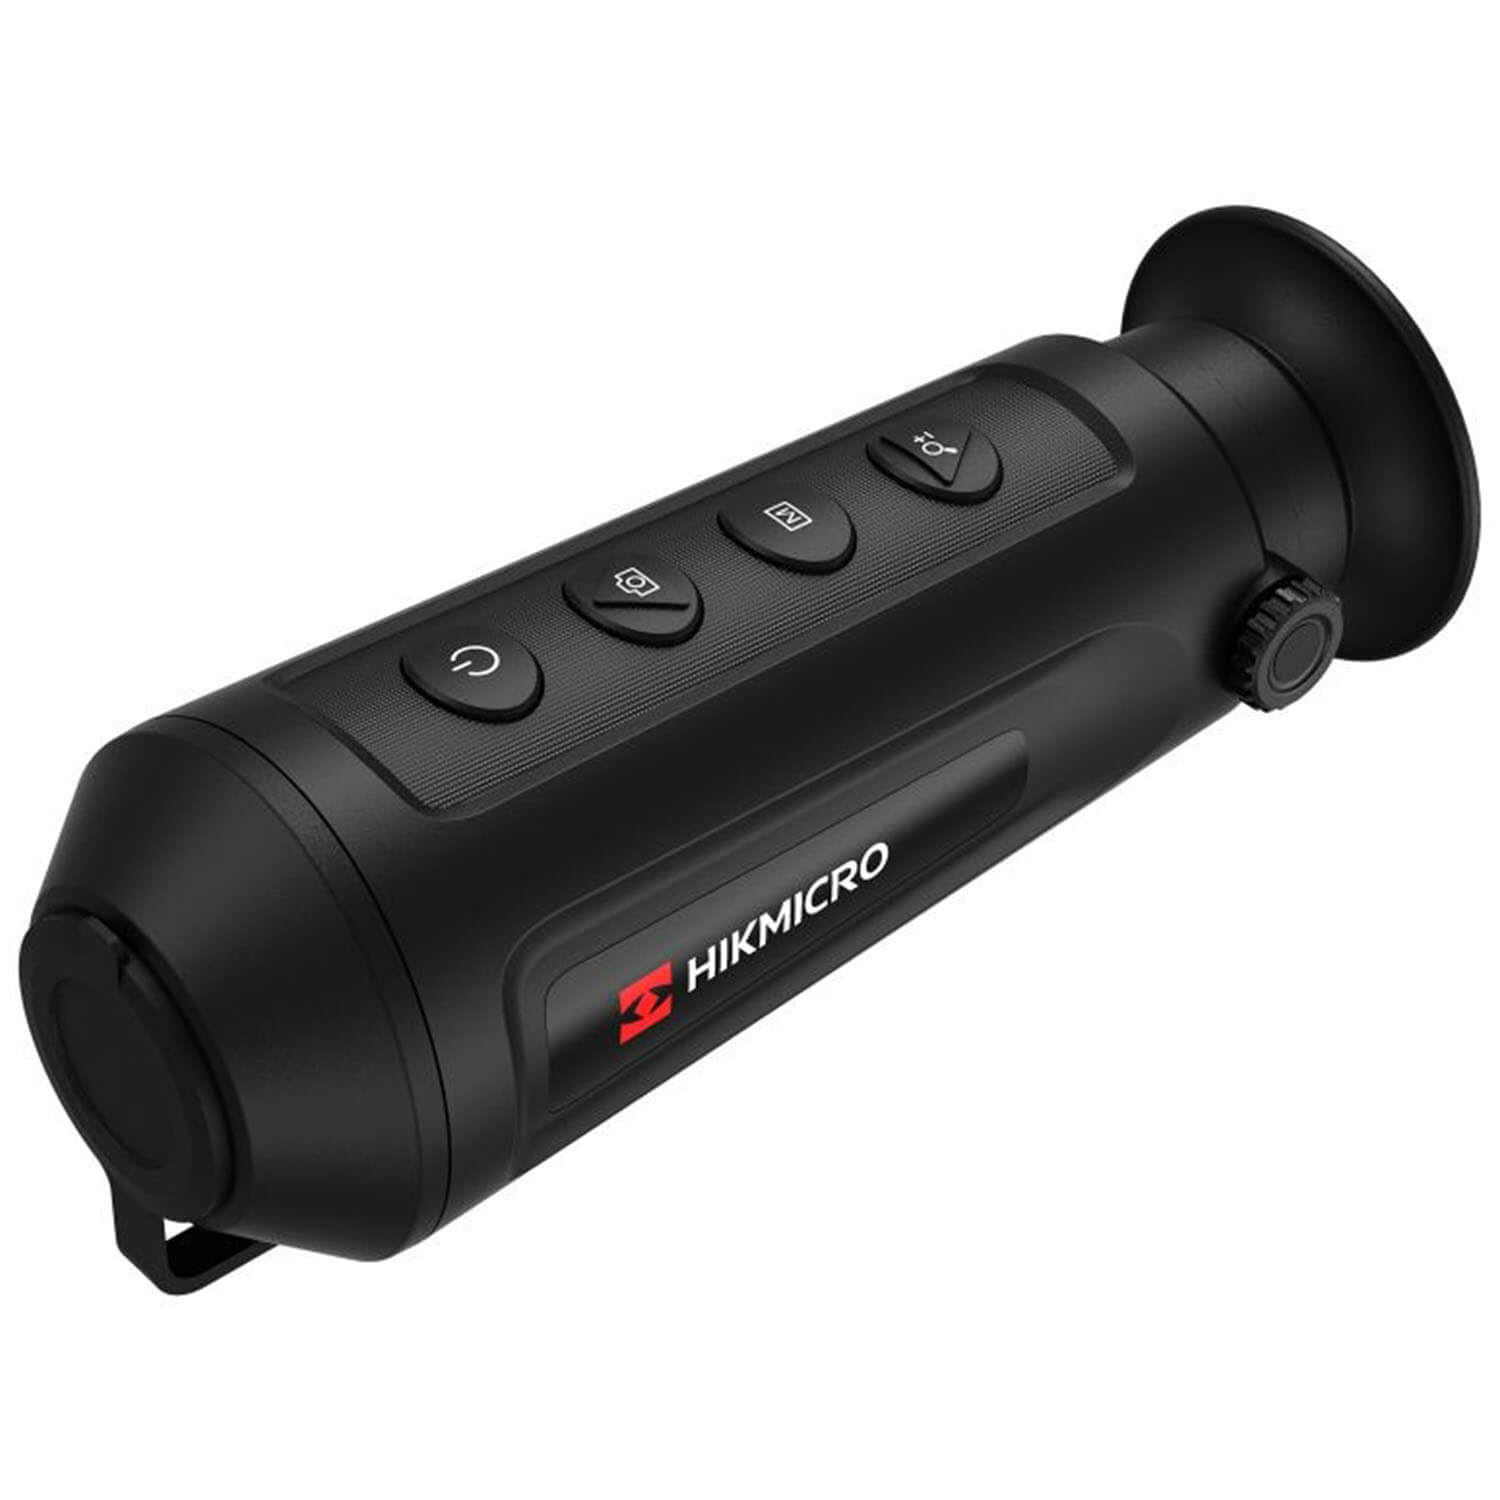 Hikmicro thermal device lynx LC06S - Night Vision Devices